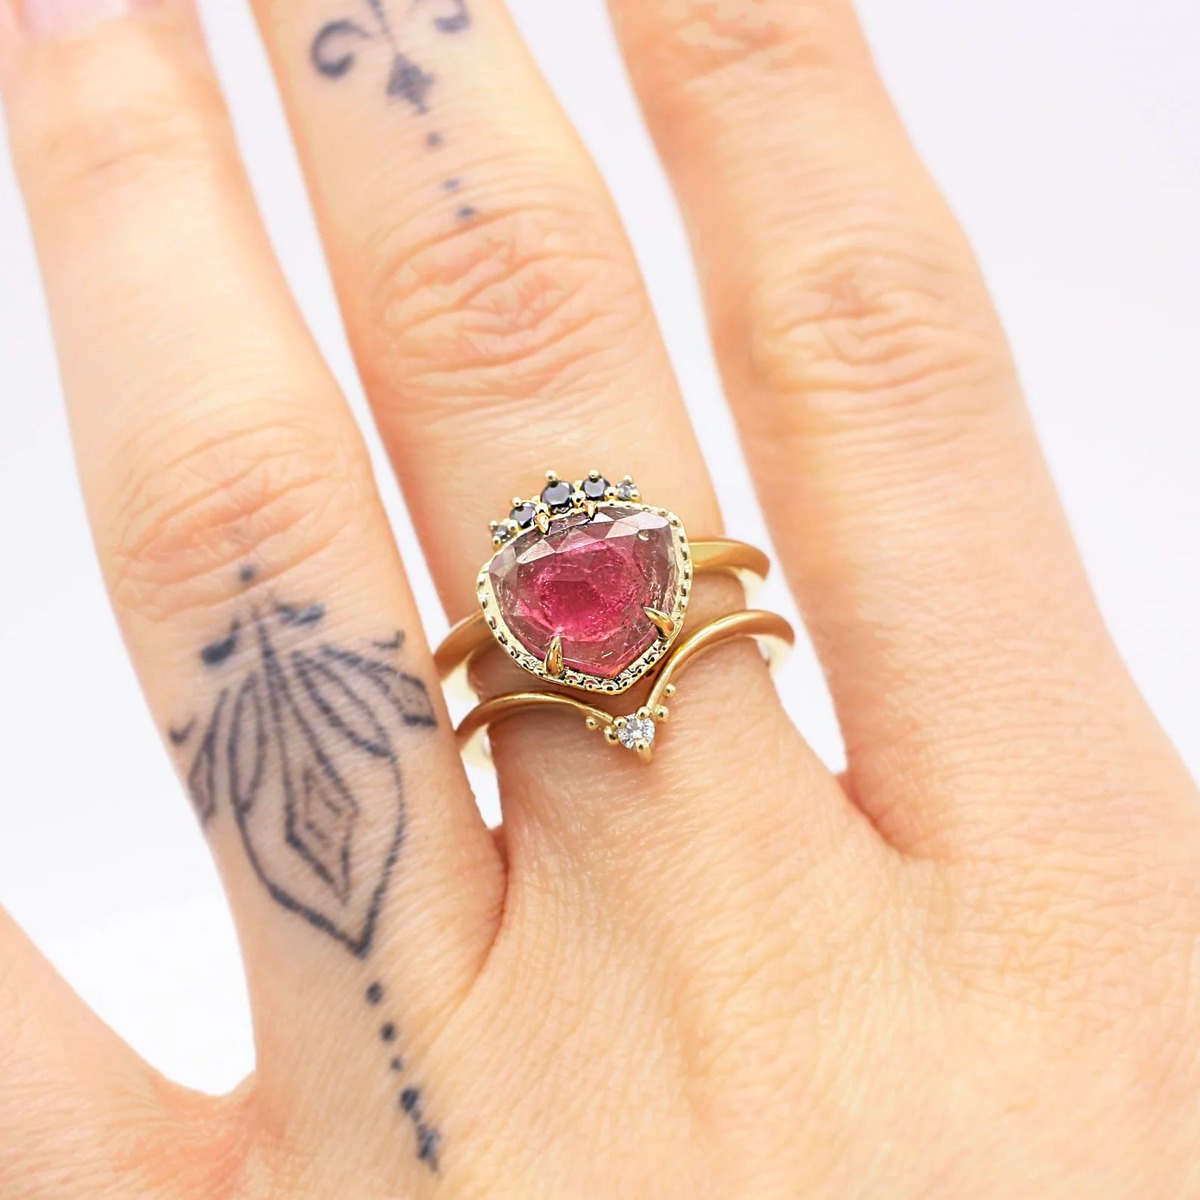 Watermelon engagement ring